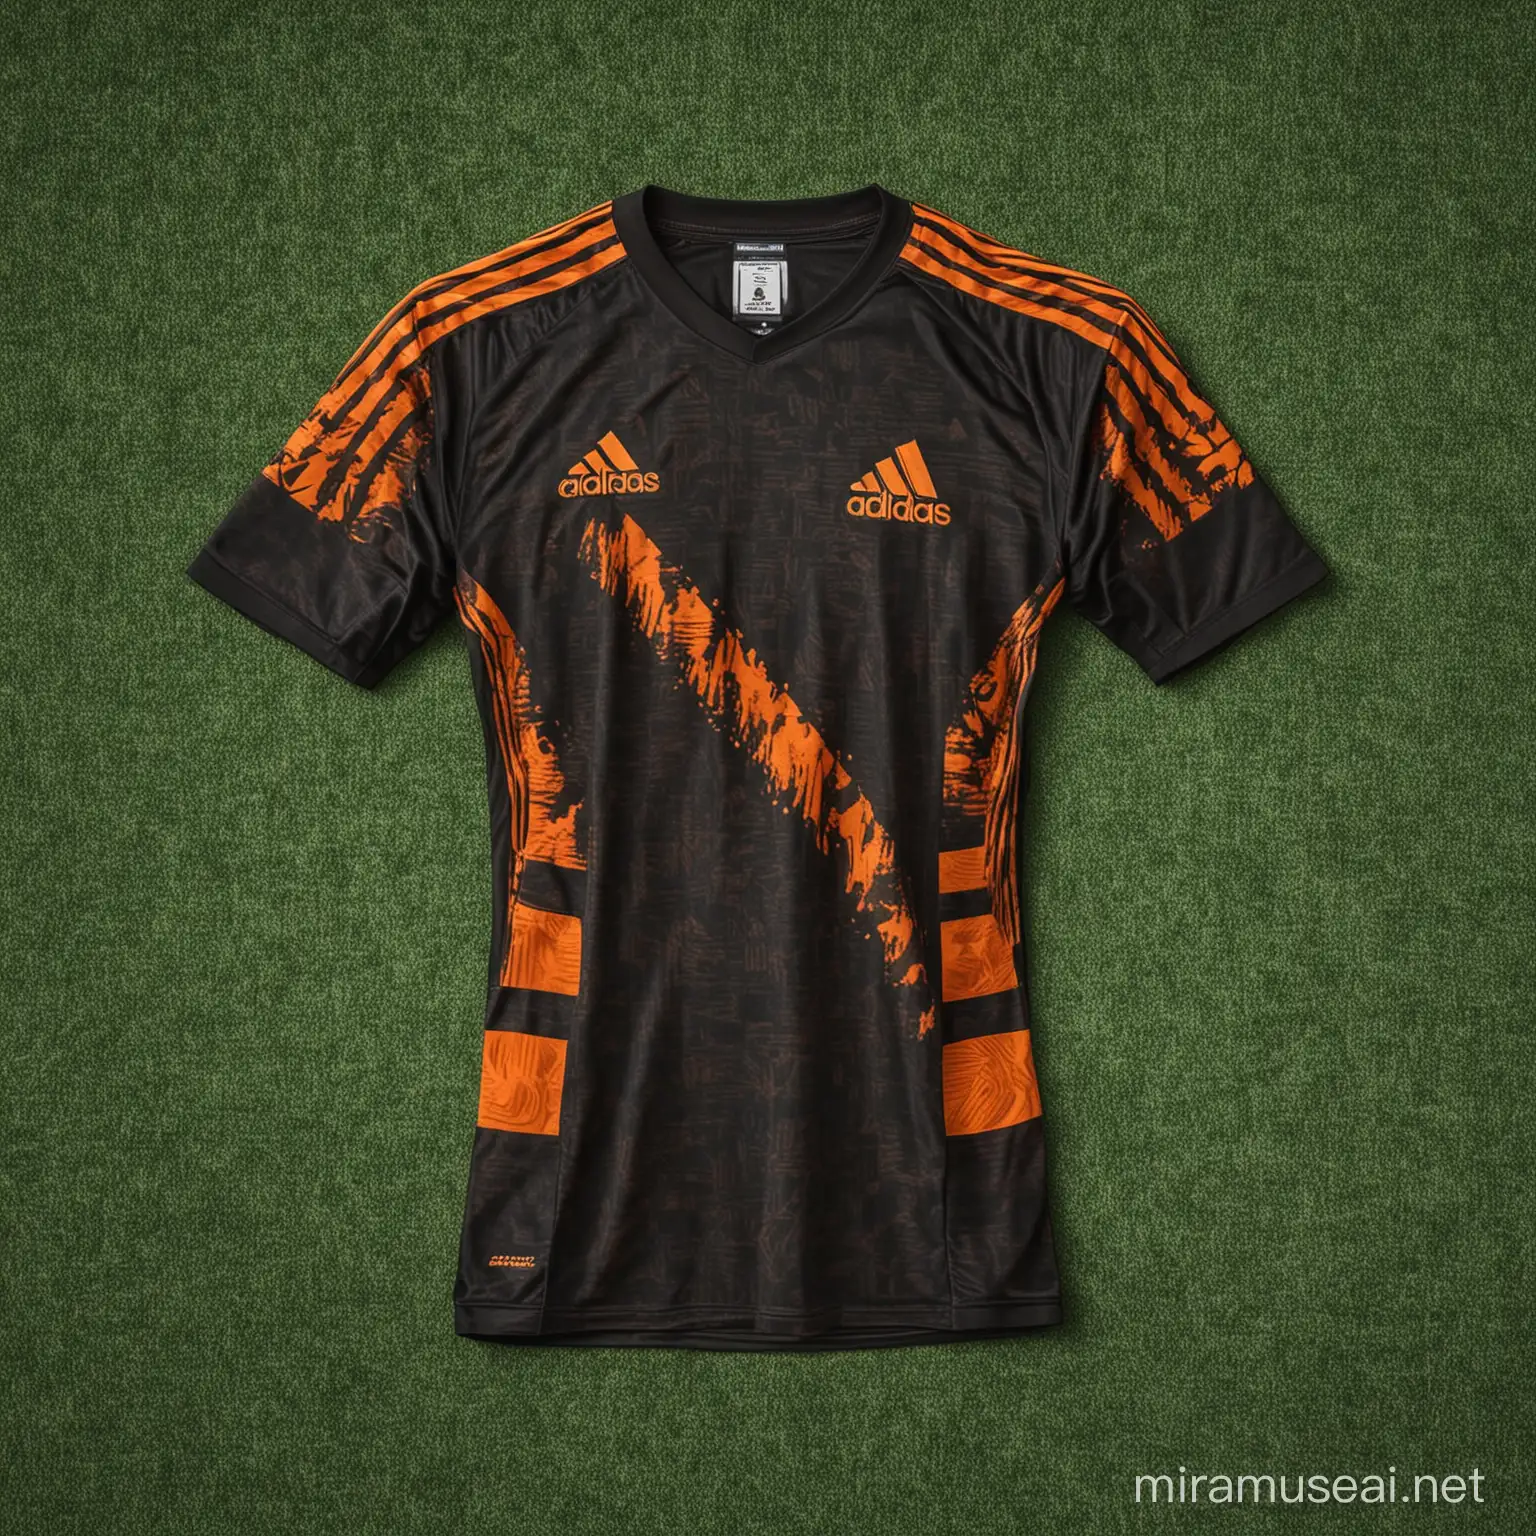 Make a football jersey with Orange and black color shade with Adidas jacquard designs 
Can you make multiple designs 
